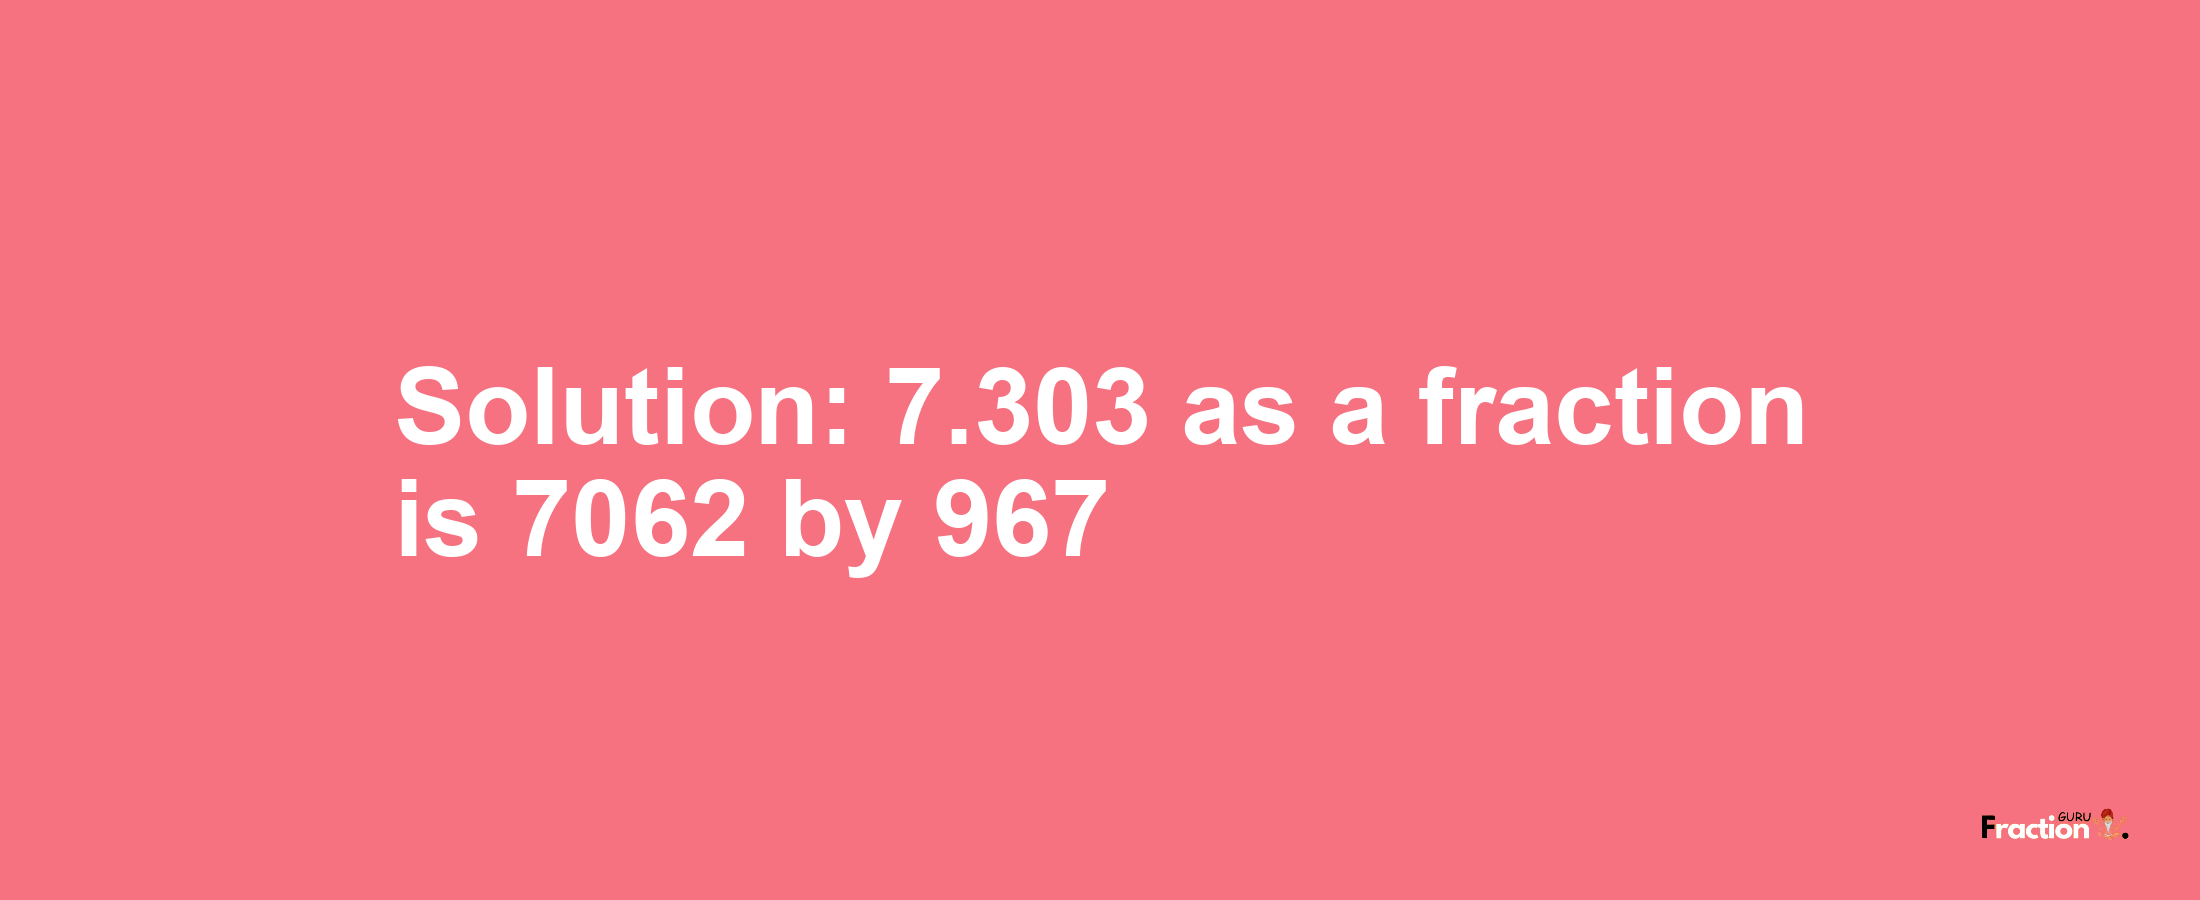 Solution:7.303 as a fraction is 7062/967